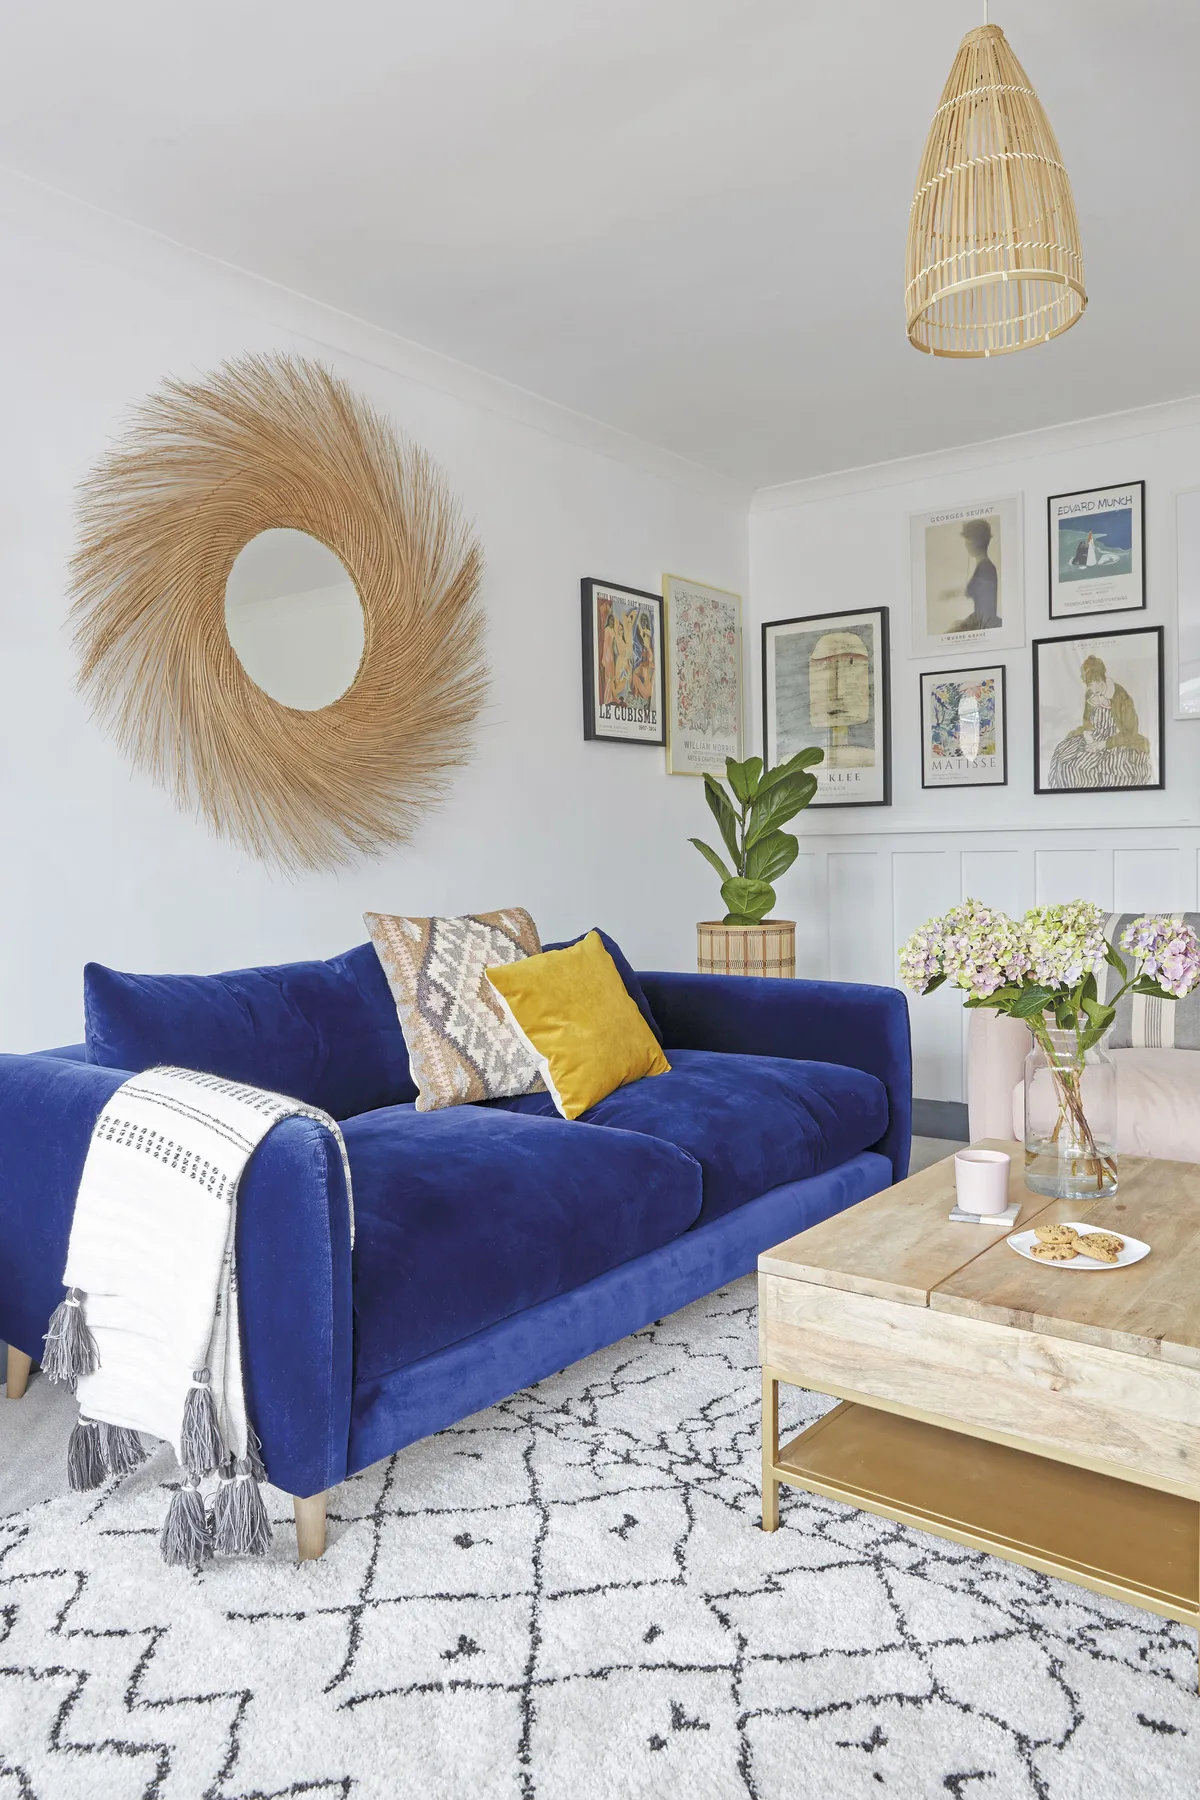 ‘This is one of my favourite rooms and I love the sofas in here. They’re from Loaf and our dog Jenson is banned from going on them! This room is really calming so I come in here with a cuppa to relax after work. The big mirror from Anthropologie is one of my favourite buys’